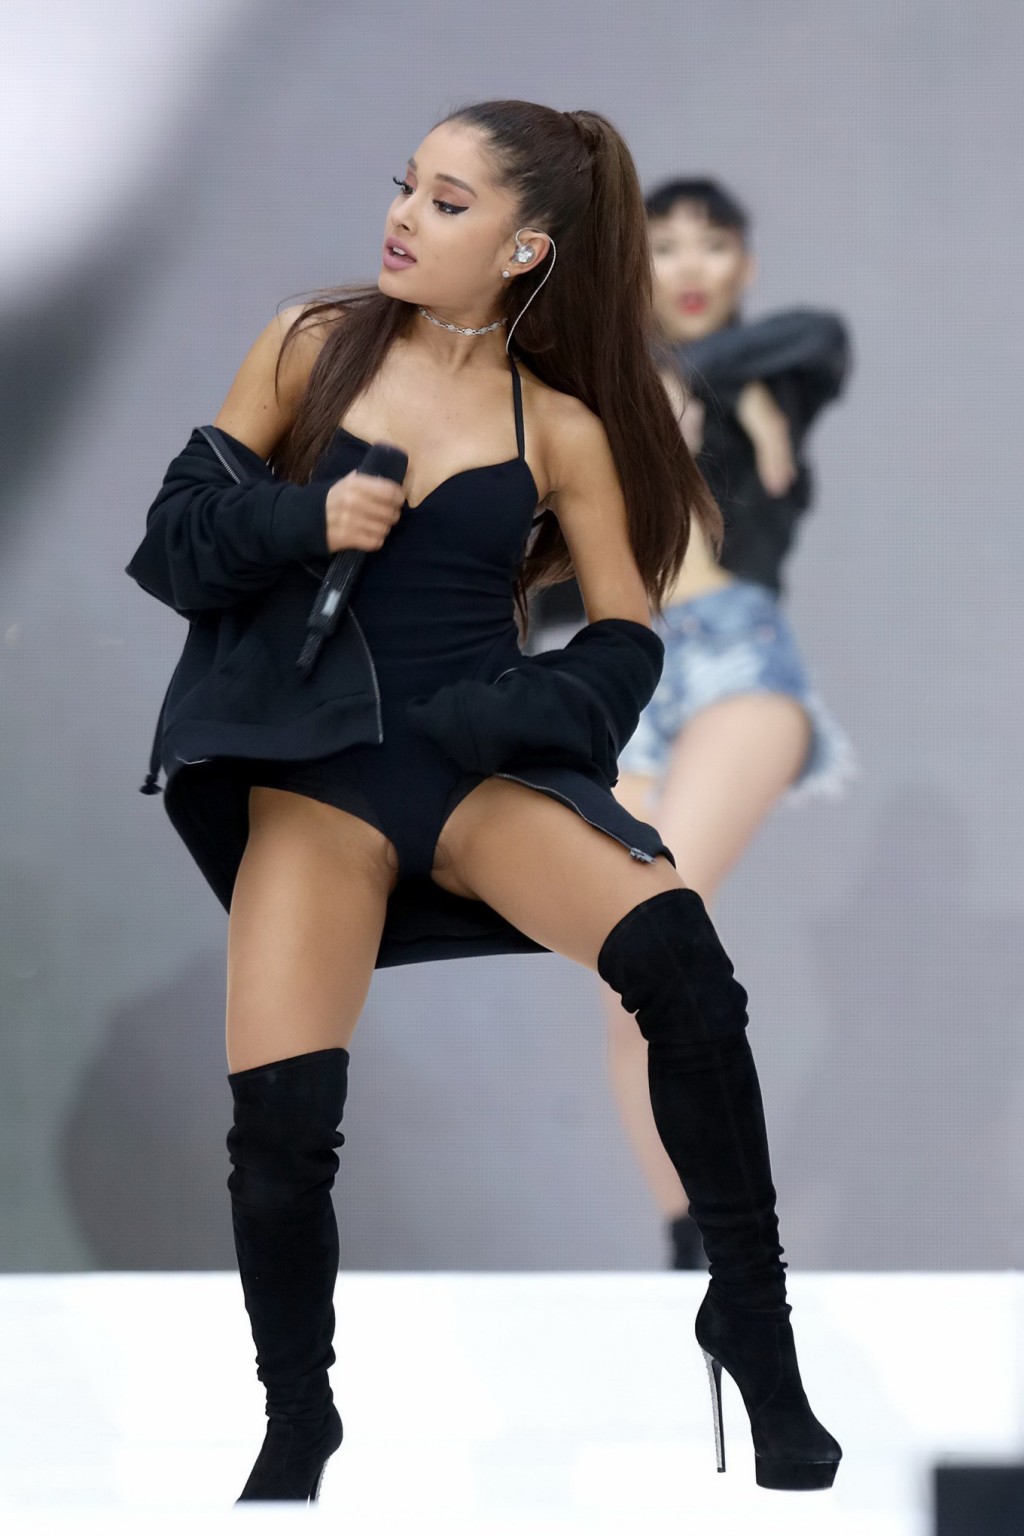 Ariana Grande shows off her shaved pussy in a tiny black outfit while performing #75161916